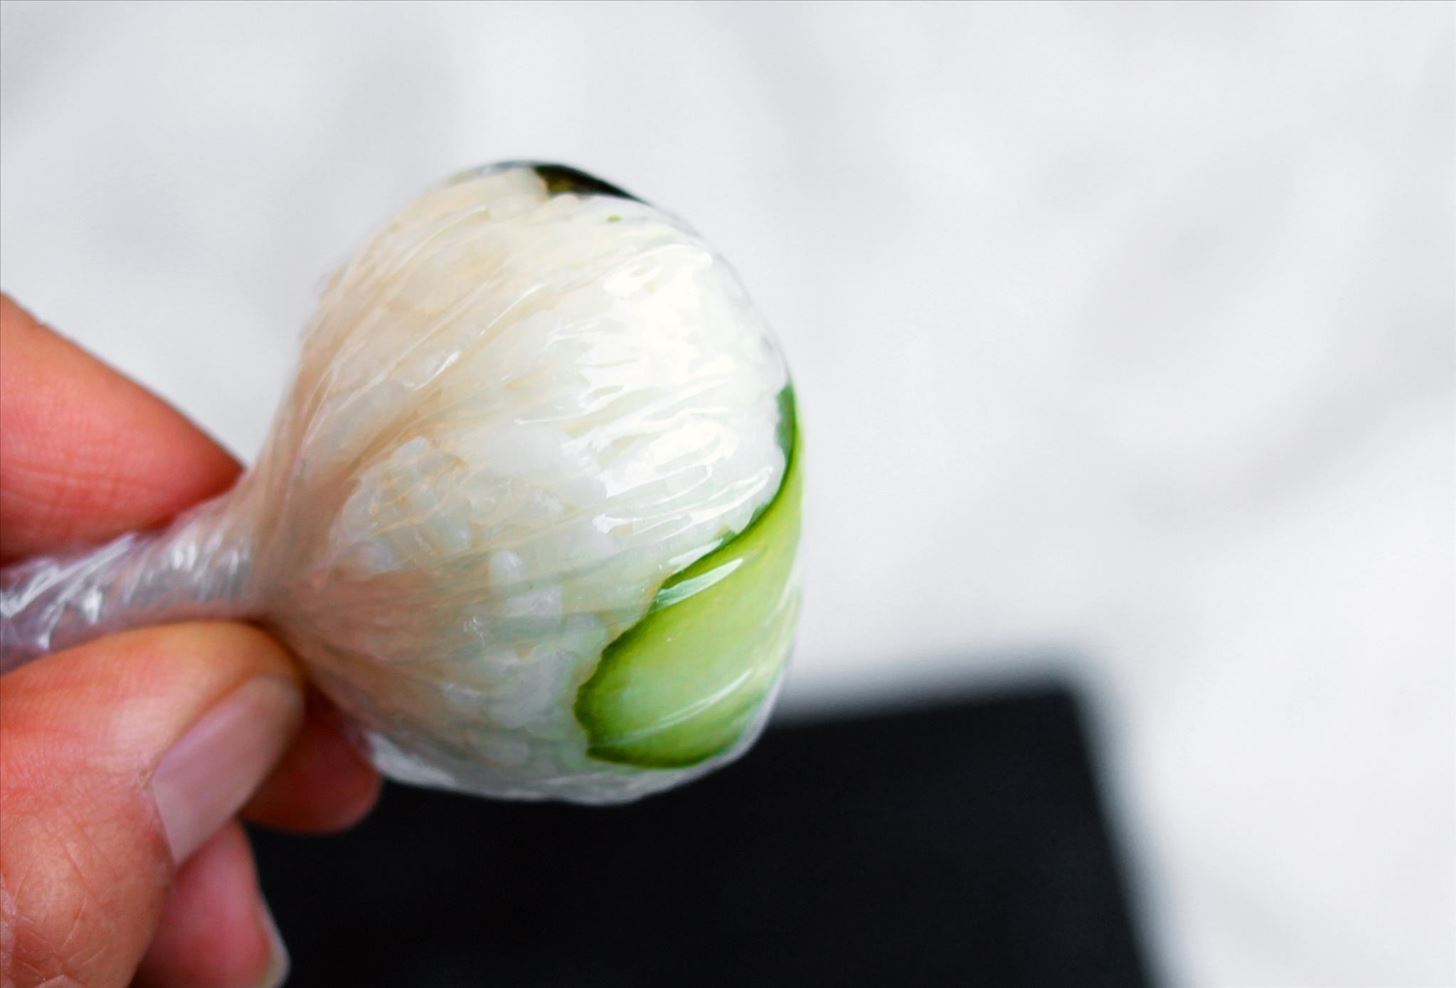 How to Make Party-Style Temari Sushi